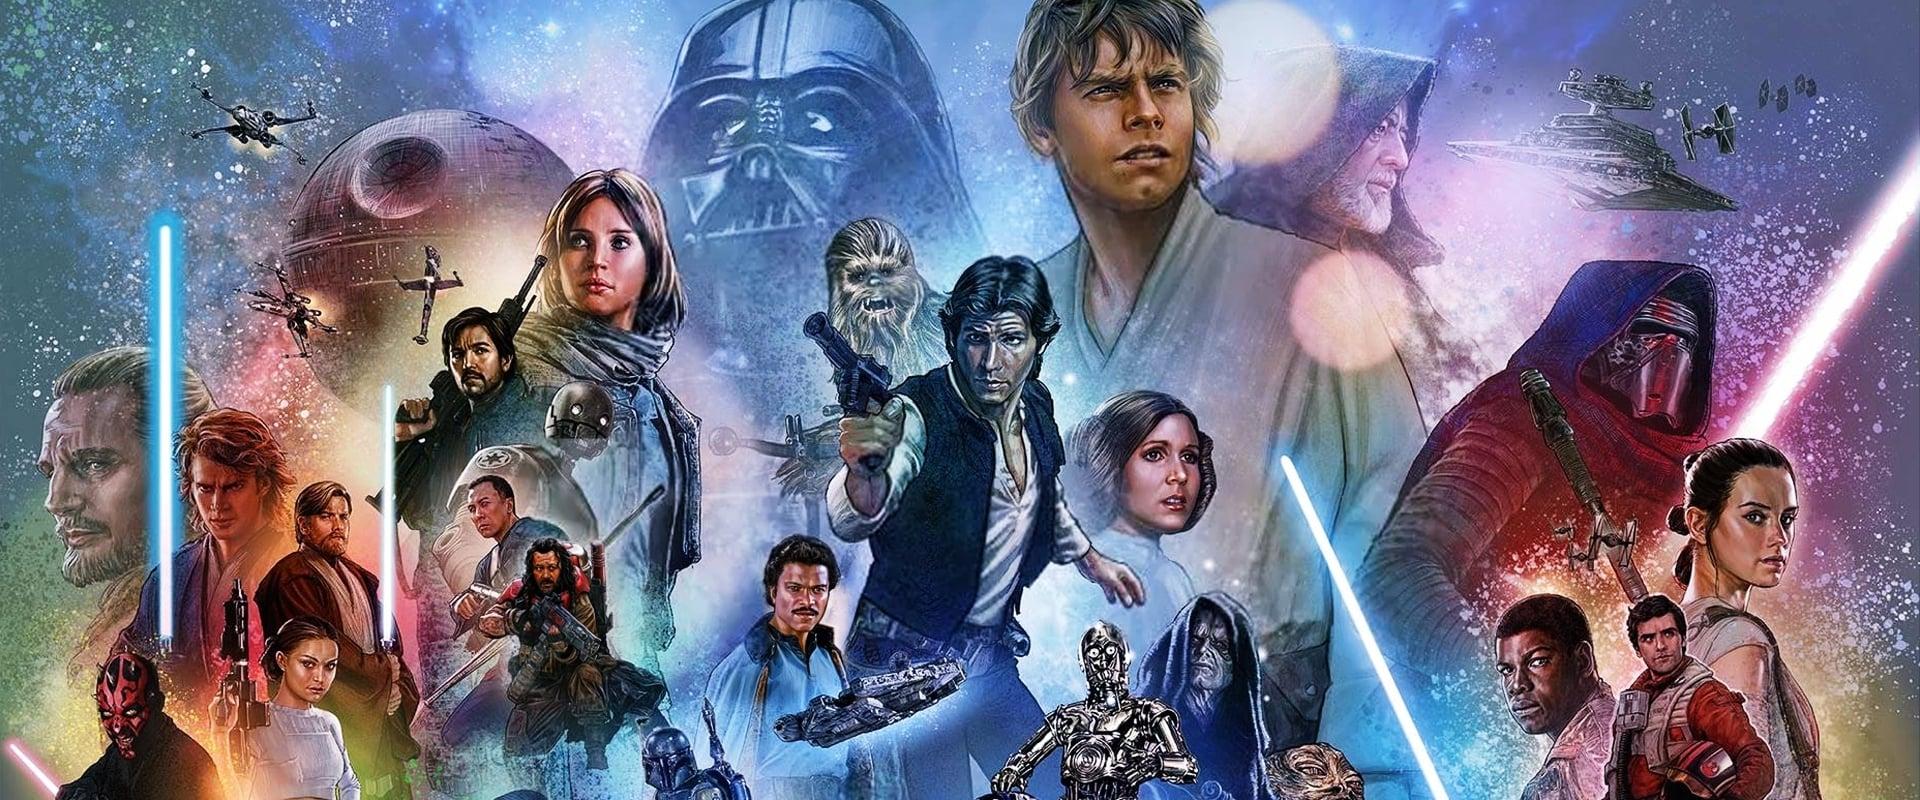 A selection of the characters from the Star Wars movies